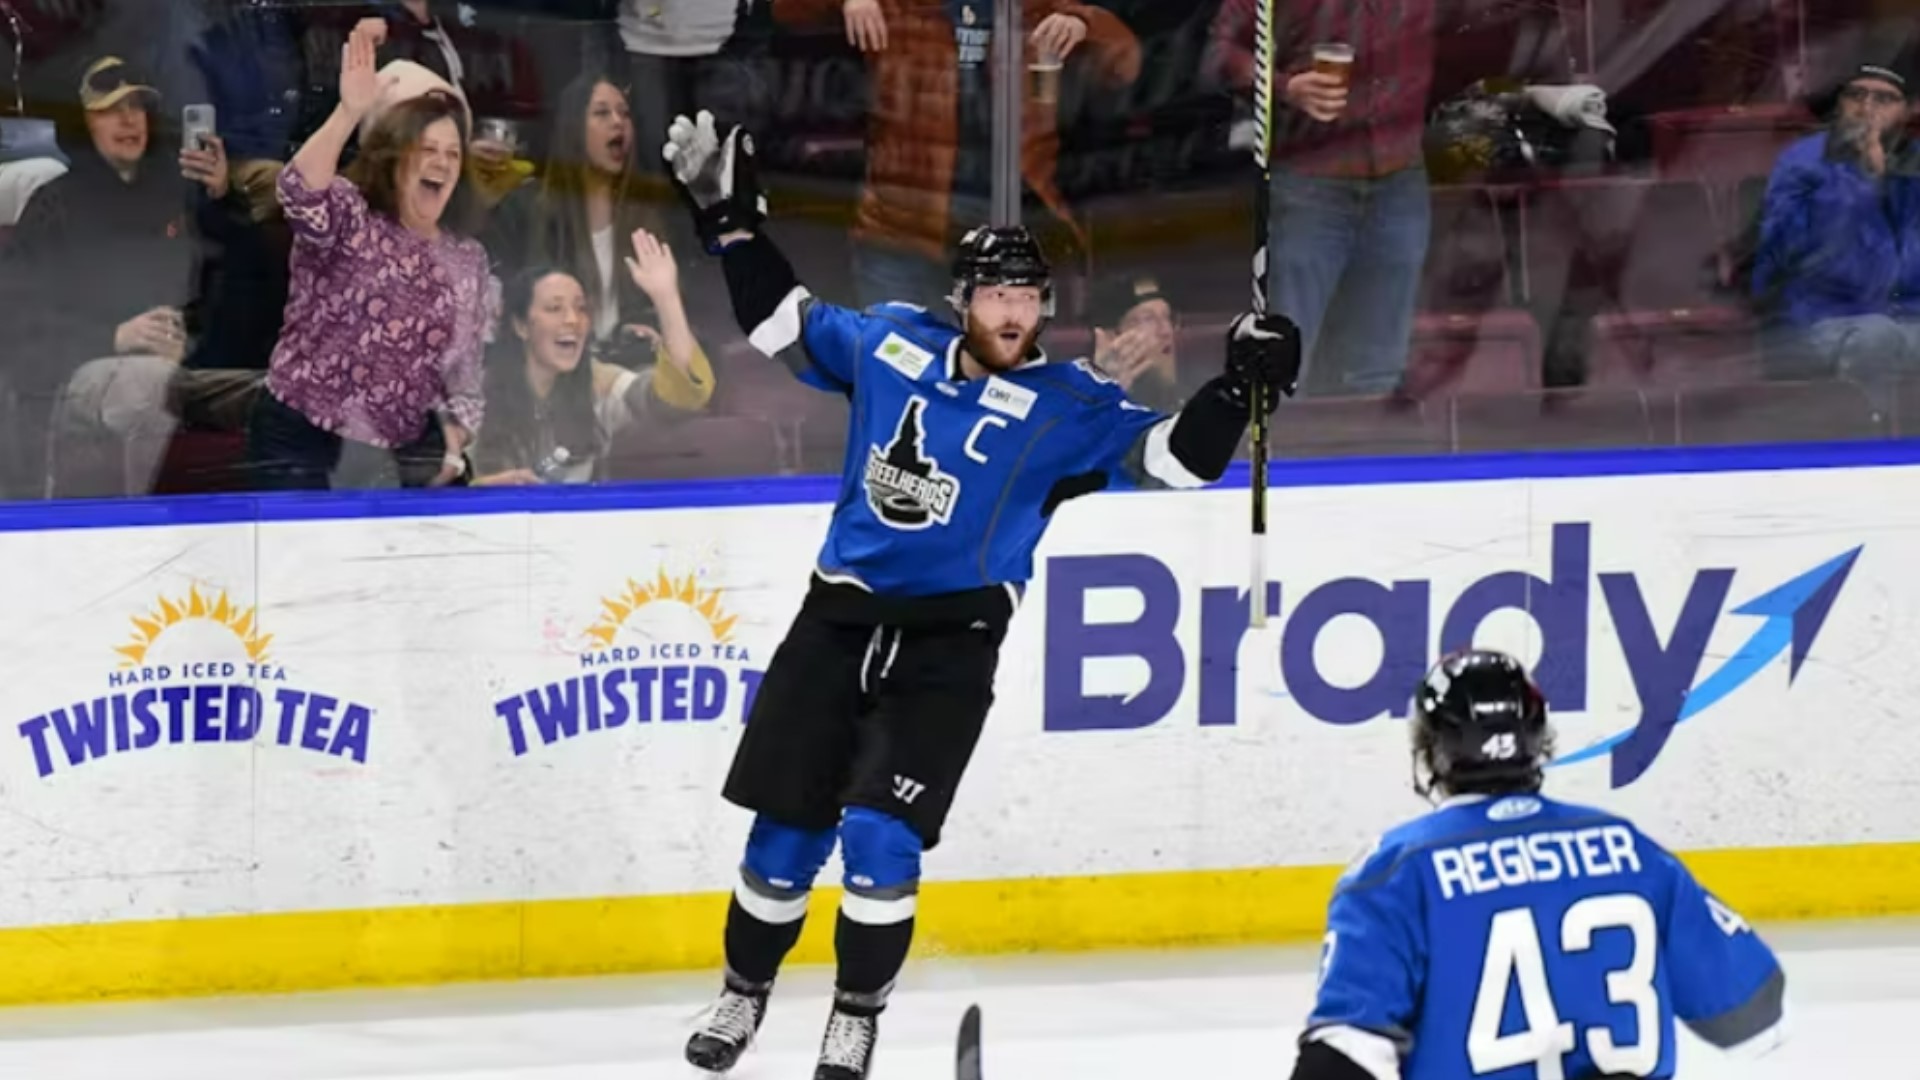 White is the second Steelhead in ECHL history to receive the annual award, joining Derek Nesbitt. The Idaho captain has scored a career-high 26 goals this year.